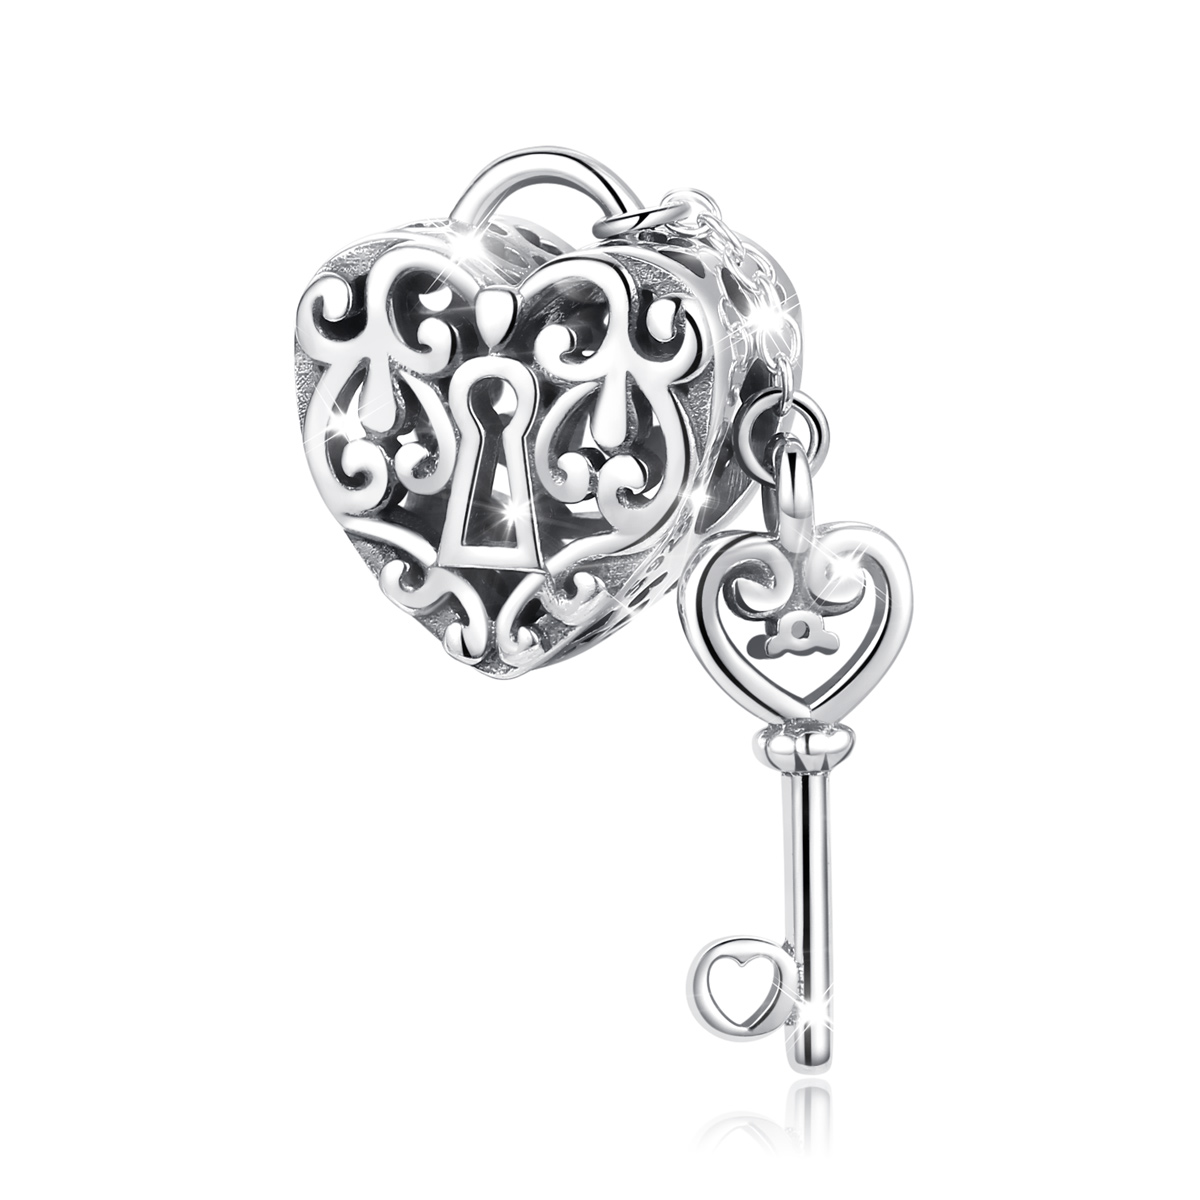 Merryshine Jewelry: Exquisite 925 Silver DIY Heart Lock Pendant with Vintage Oxidized Silver Beads and Key Charm